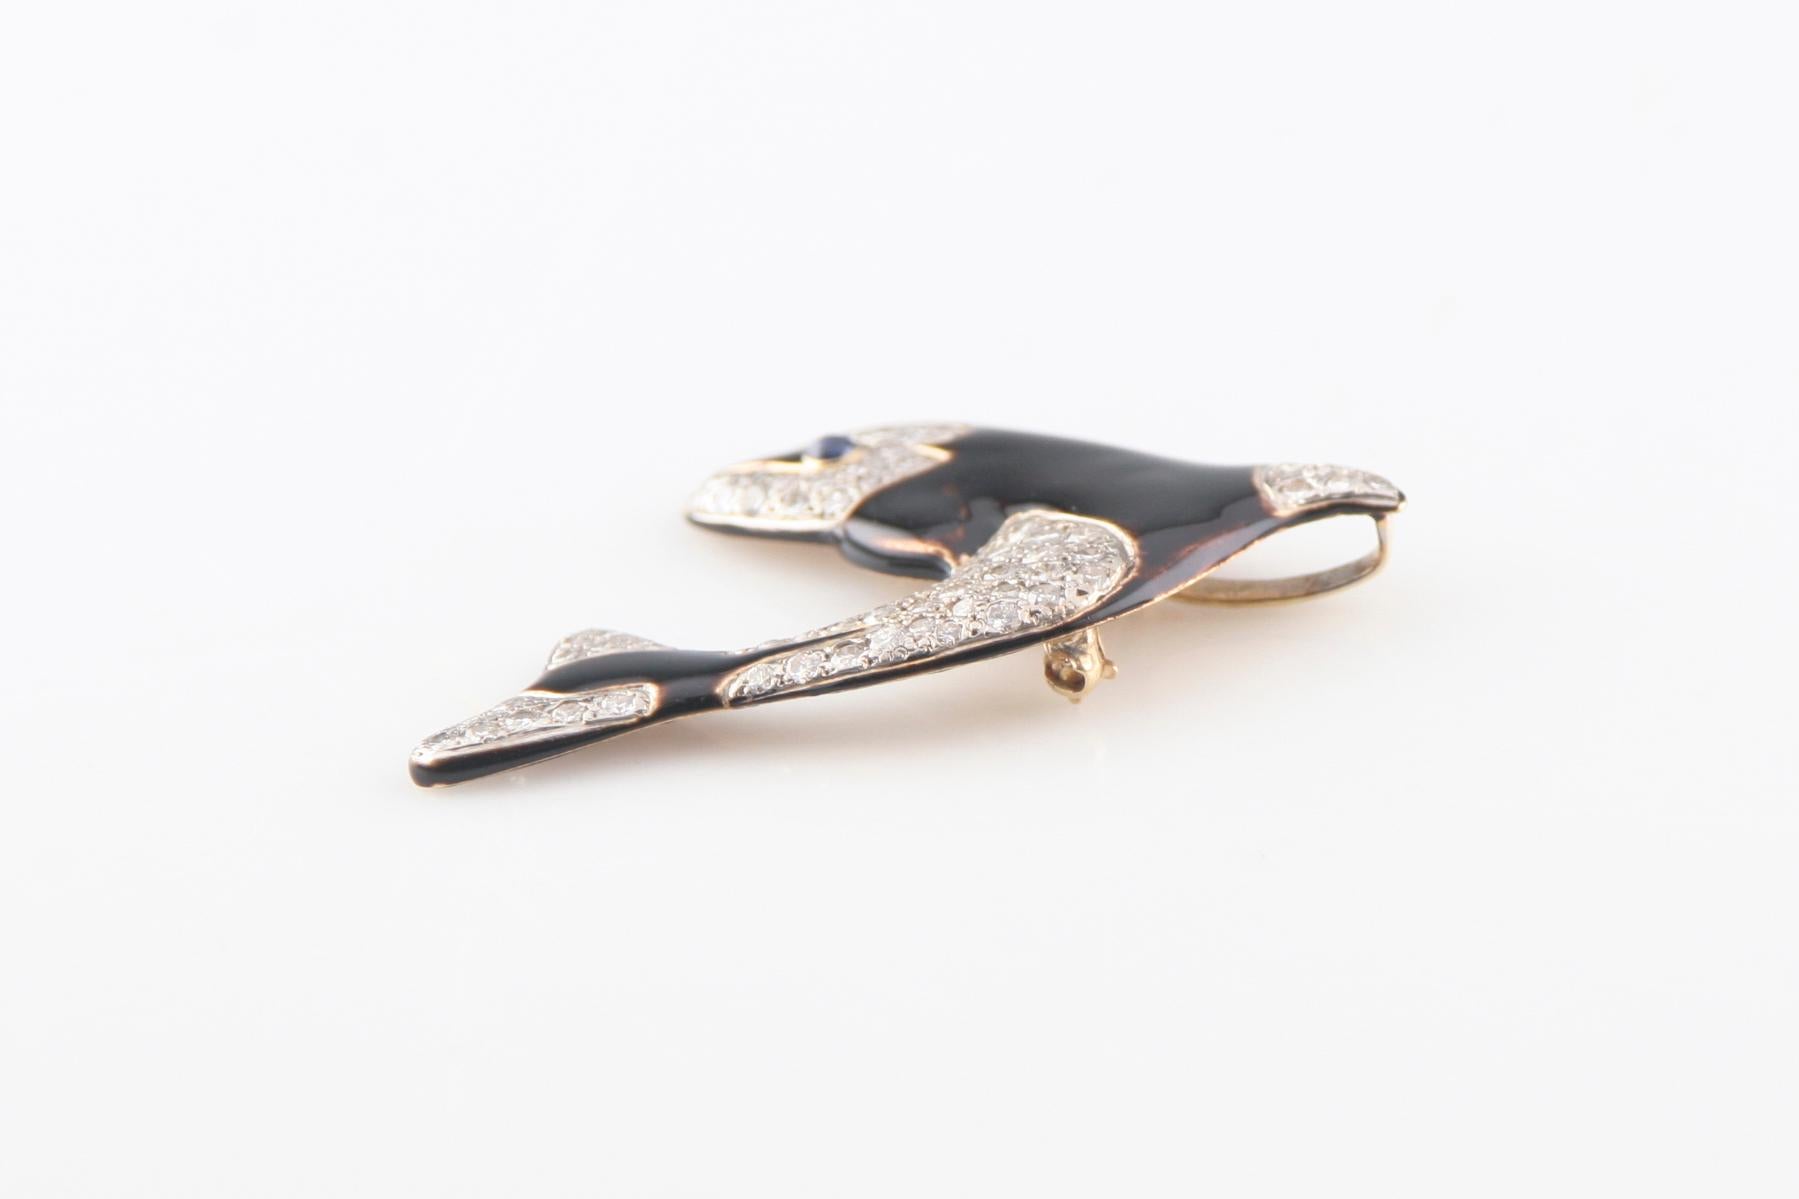 METAL: 14 KT Yellow Gold
FEATURES: The pendant/brooch features a  jumping killer whale. 
The body of the whale is  composed of black enamel and diamond set  sections accented with rhodium. 
The eye of the  whale is accented with a Blue